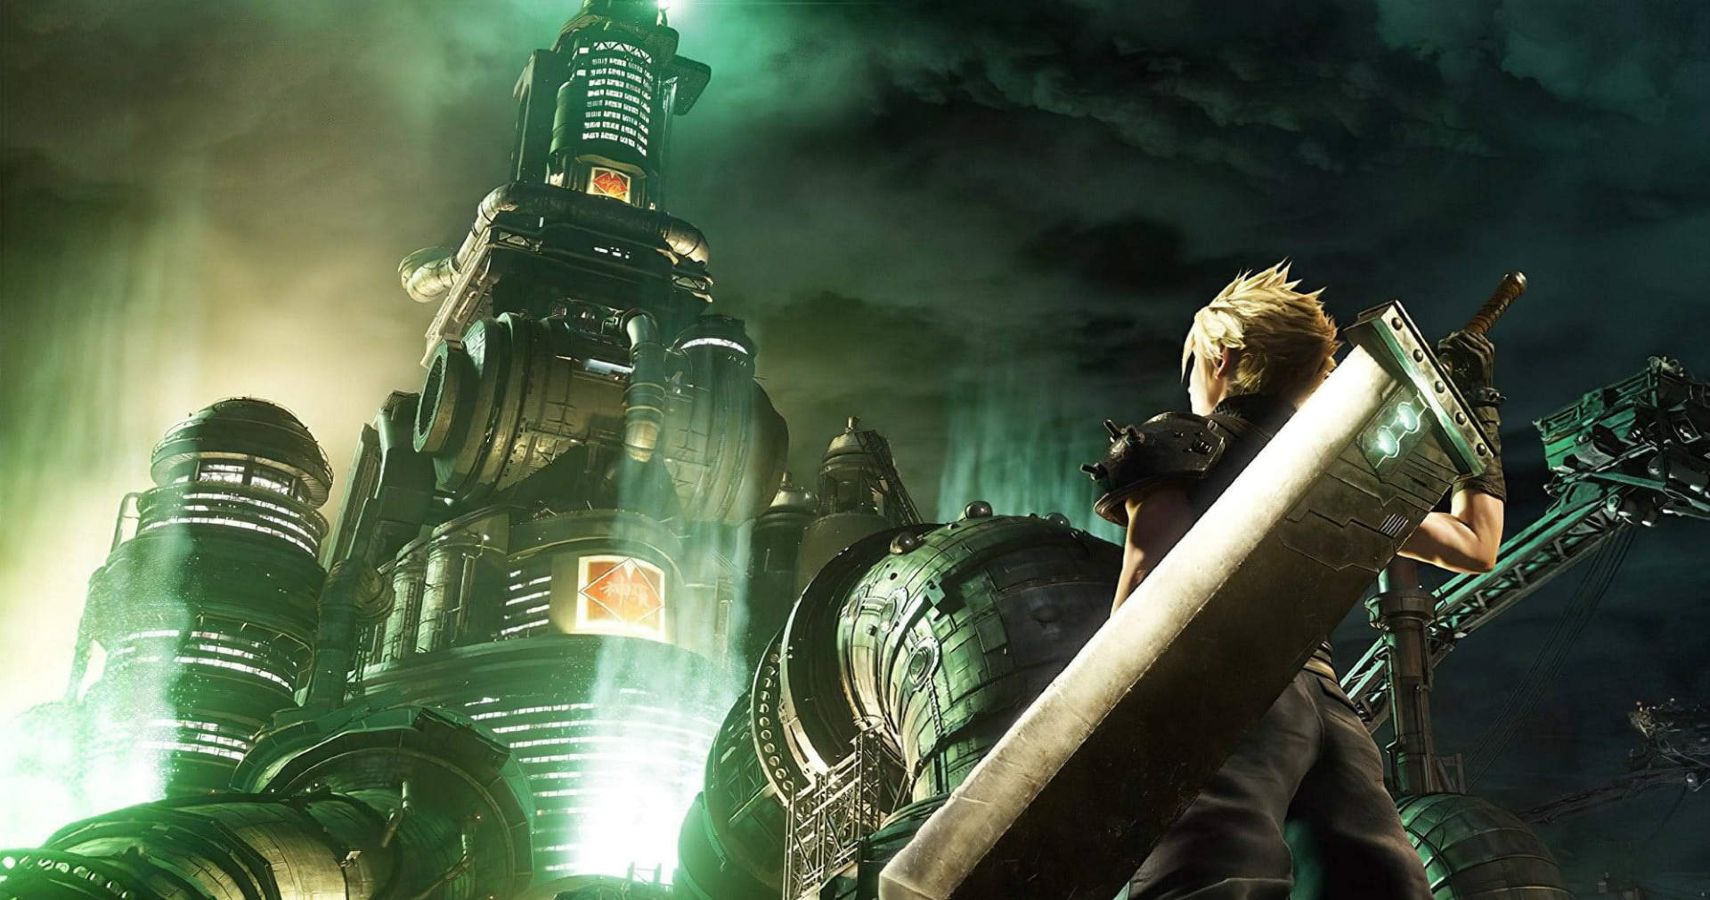 tower of the ancients ff7